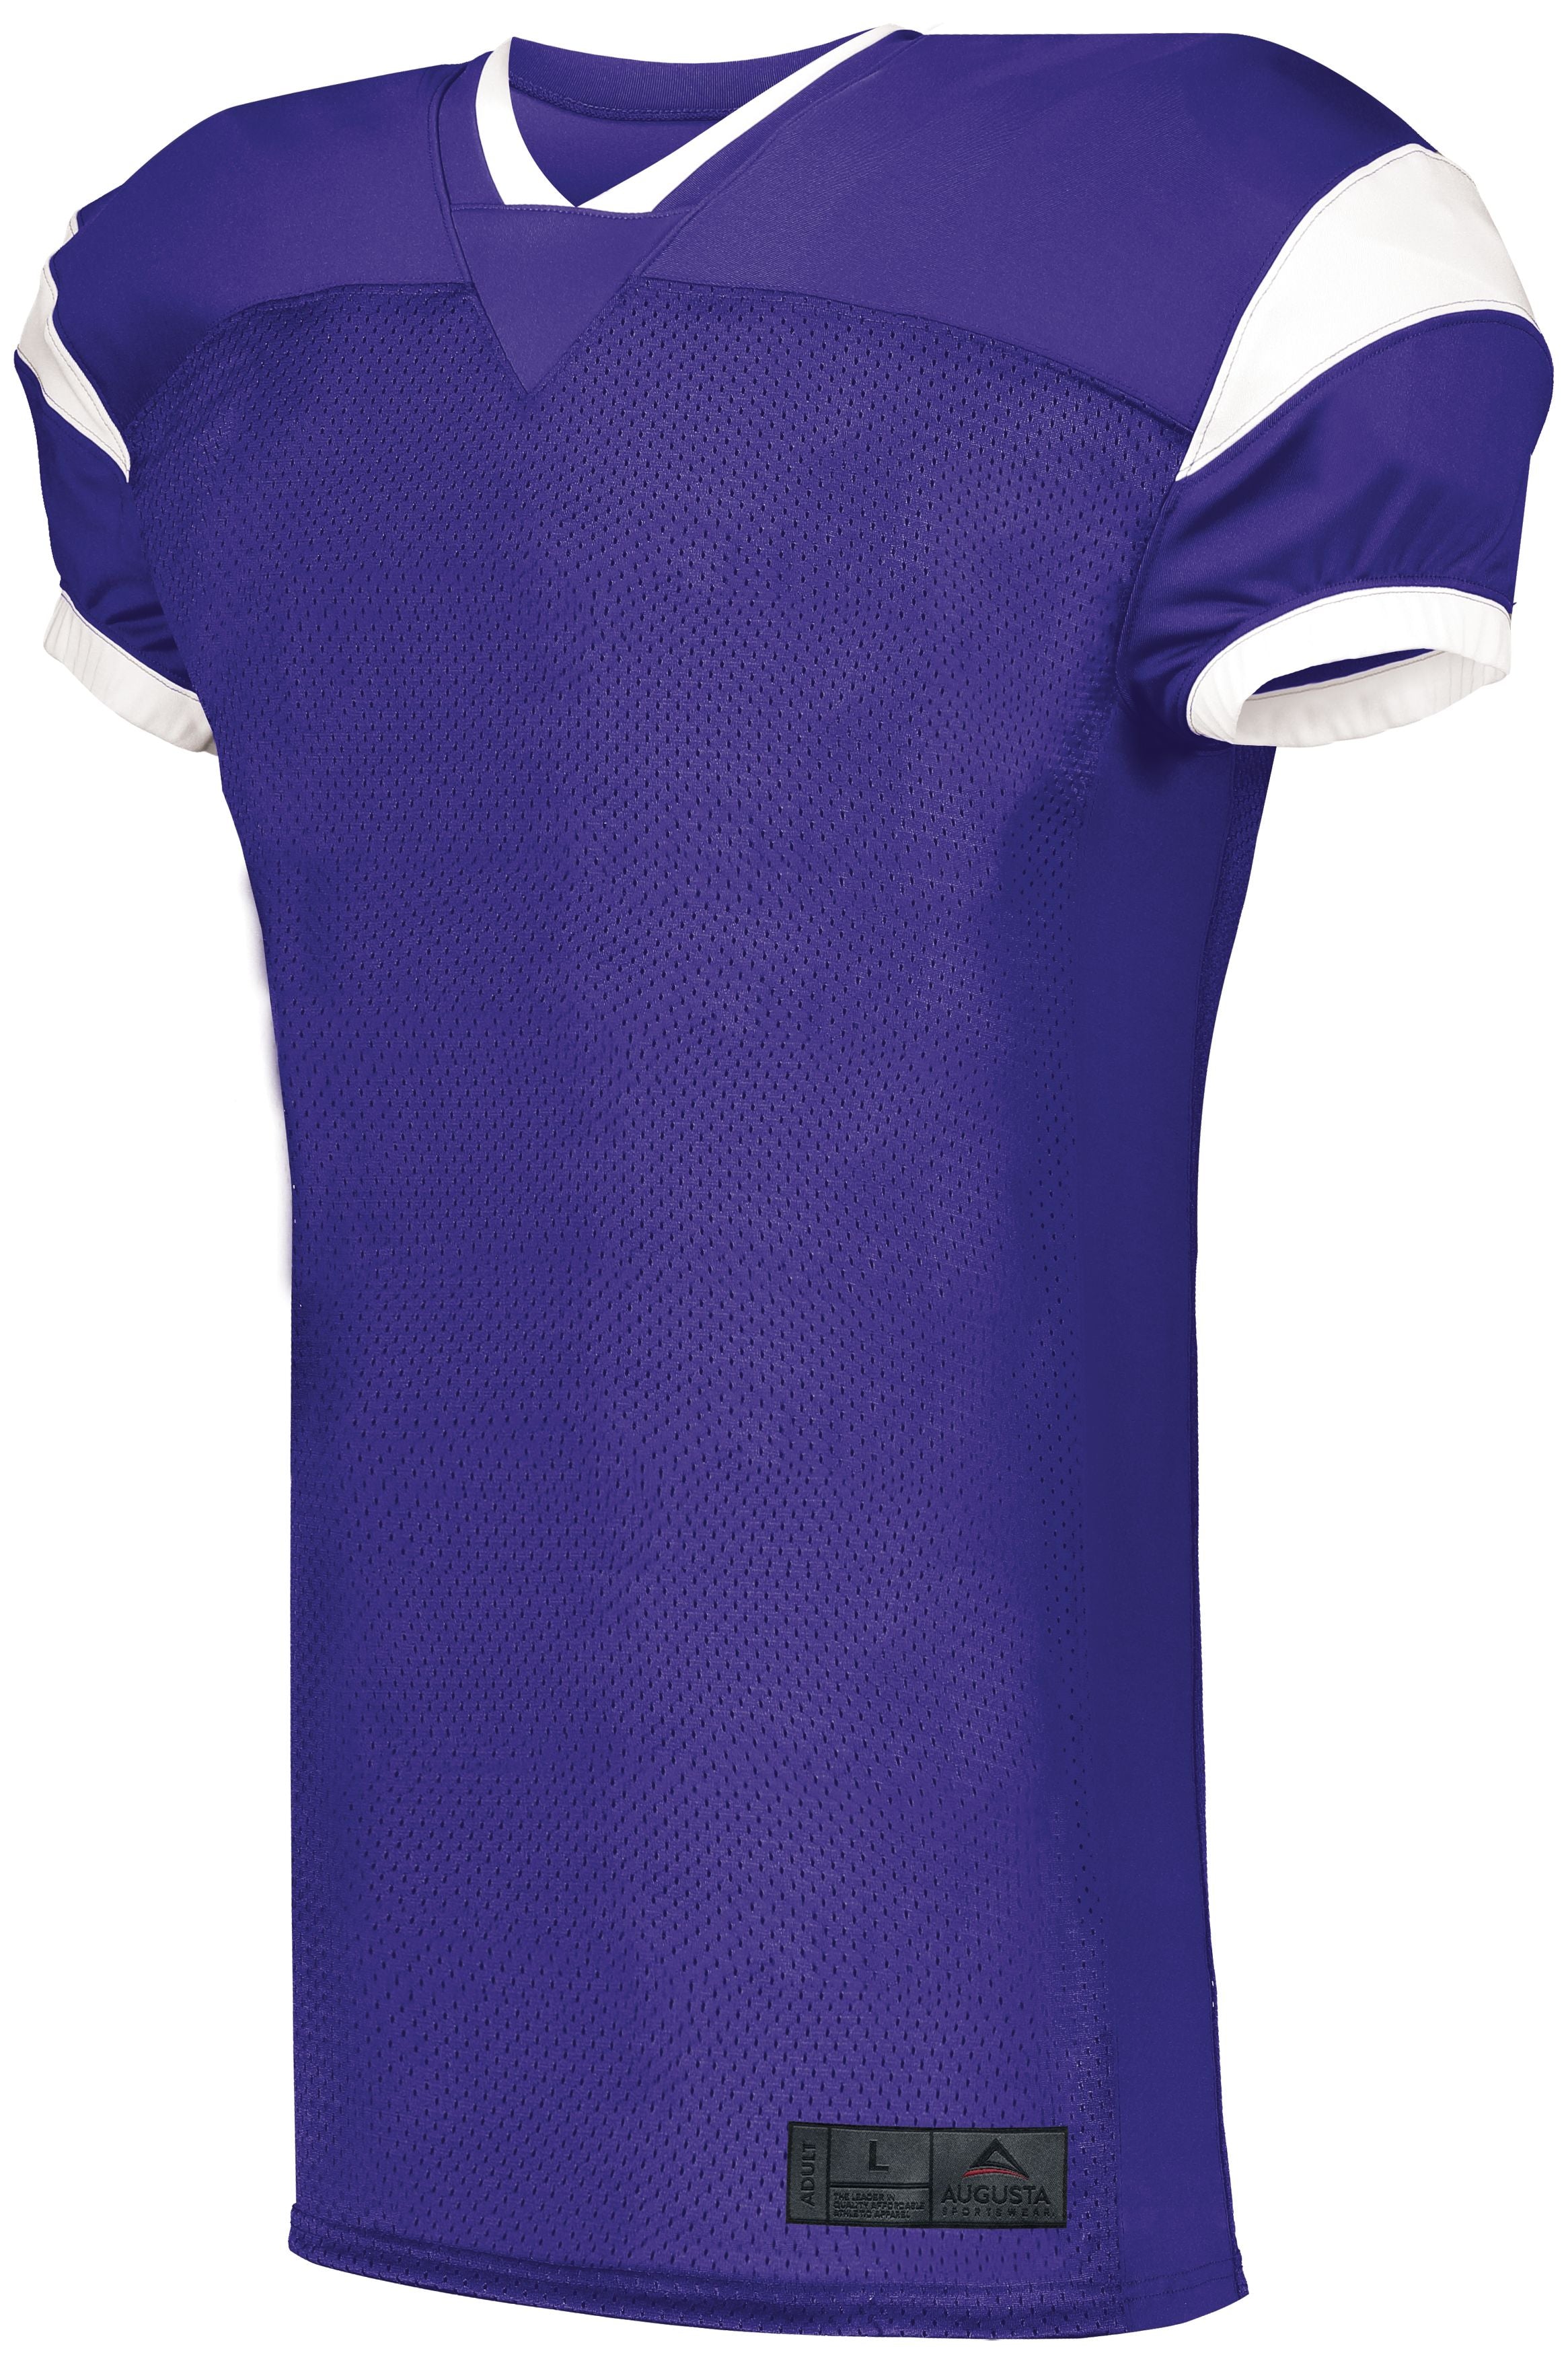 Augusta Sportswear Youth Slant Football Jersey in Purple/White  -Part of the Youth, Youth-Jersey, Augusta-Products, Football, Shirts, All-Sports, All-Sports-1 product lines at KanaleyCreations.com